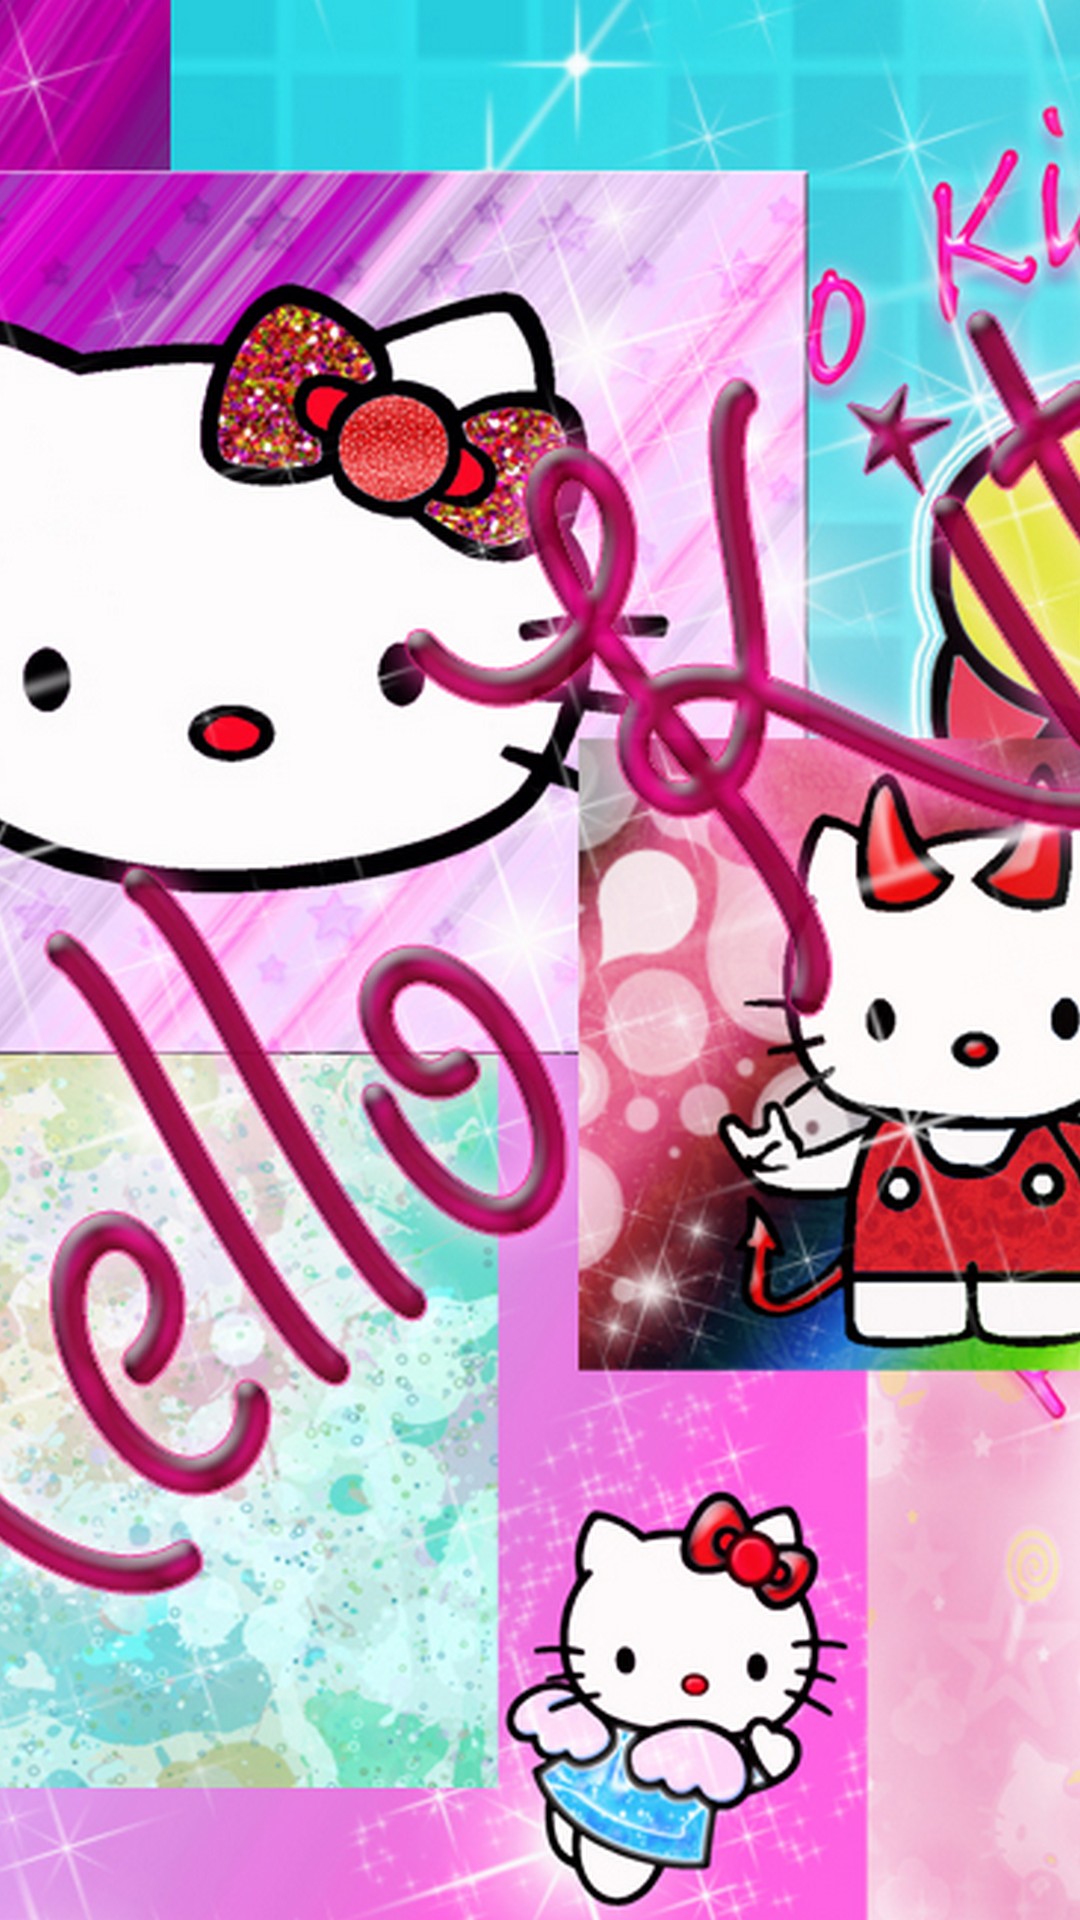 Wallpaper Android Sanrio Hello Kitty with image resolution 1080x1920 pixel. You can make this wallpaper for your Android backgrounds, Tablet, Smartphones Screensavers and Mobile Phone Lock Screen